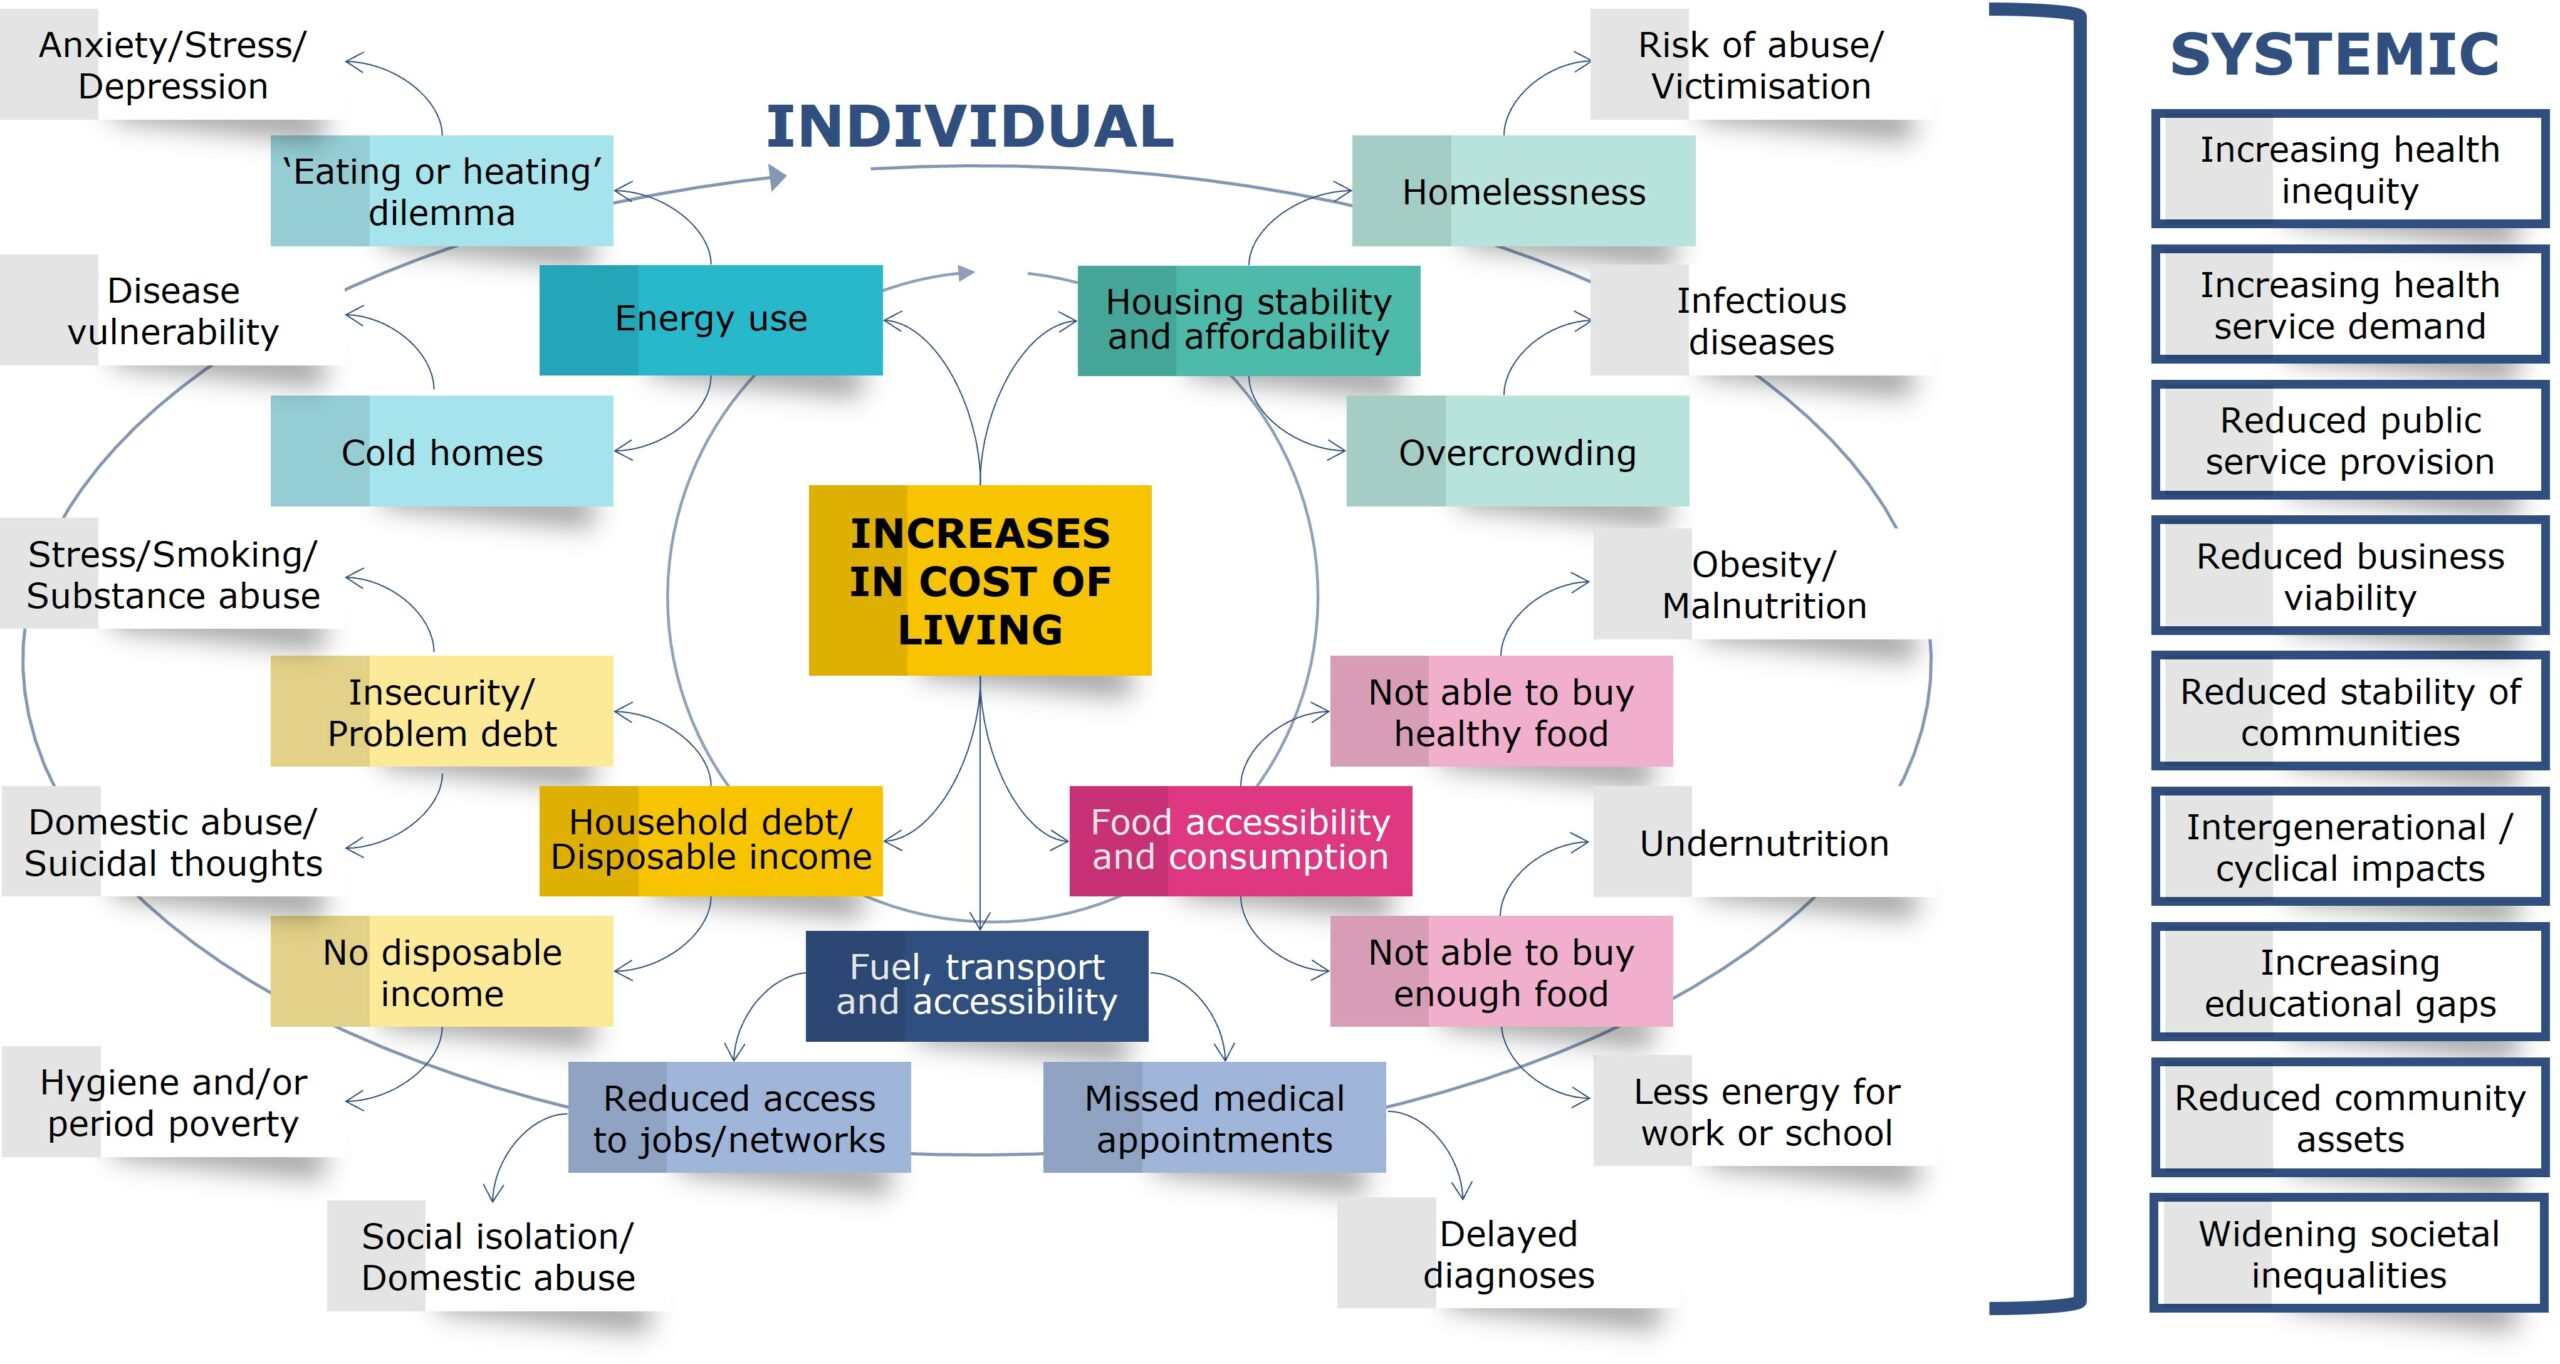 An infographic showing how an increased cost of living impacts health, including food accessibility and consumption and the eating or heating dilemma. 